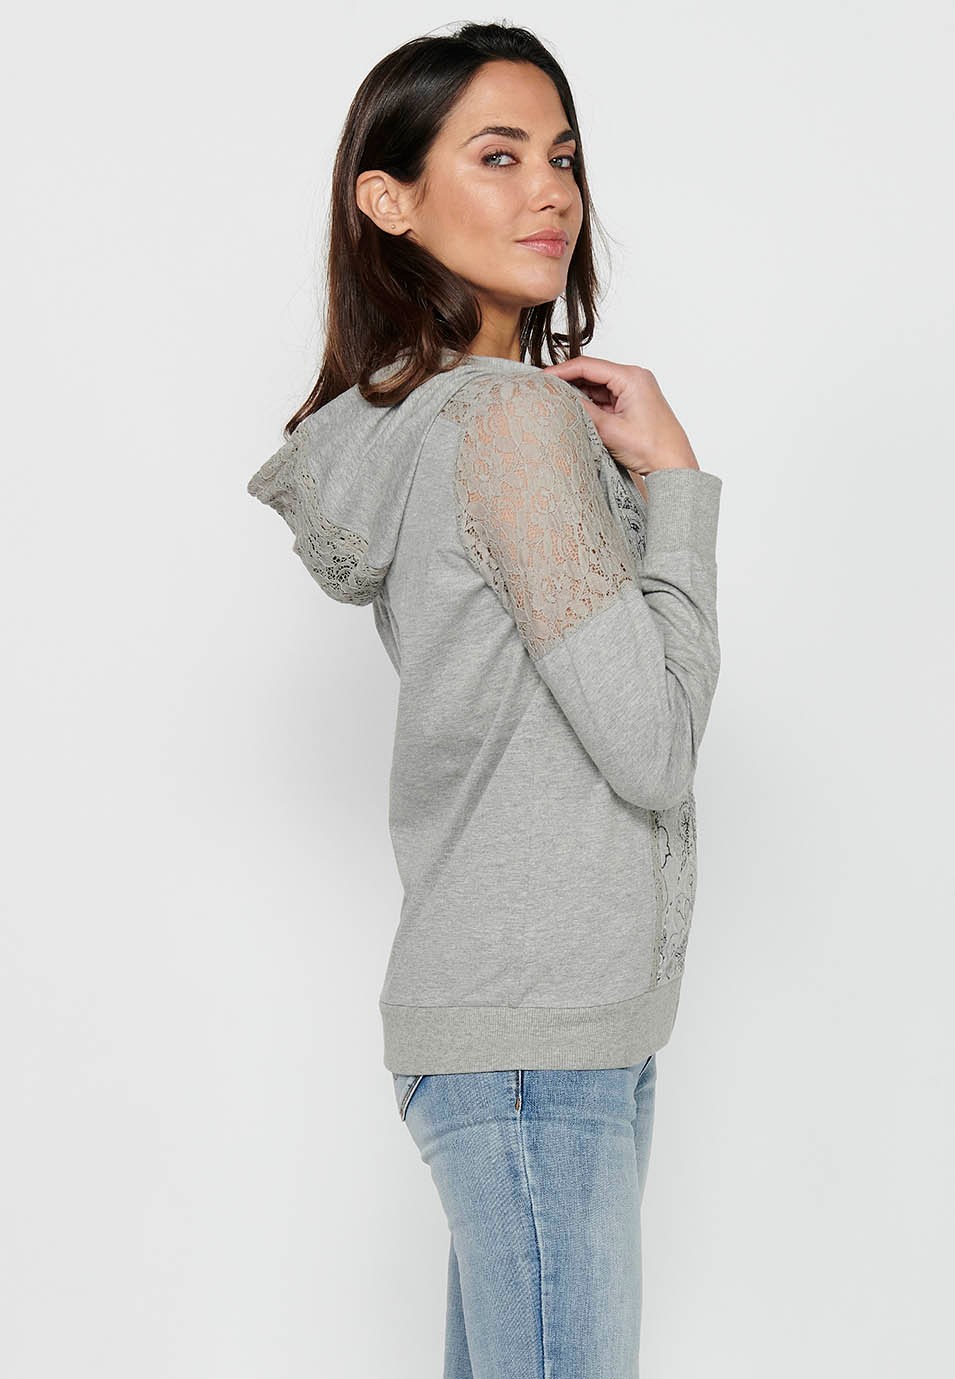 Sweatshirt jacket with zipper front closure and lace details with gray hooded collar for women 3